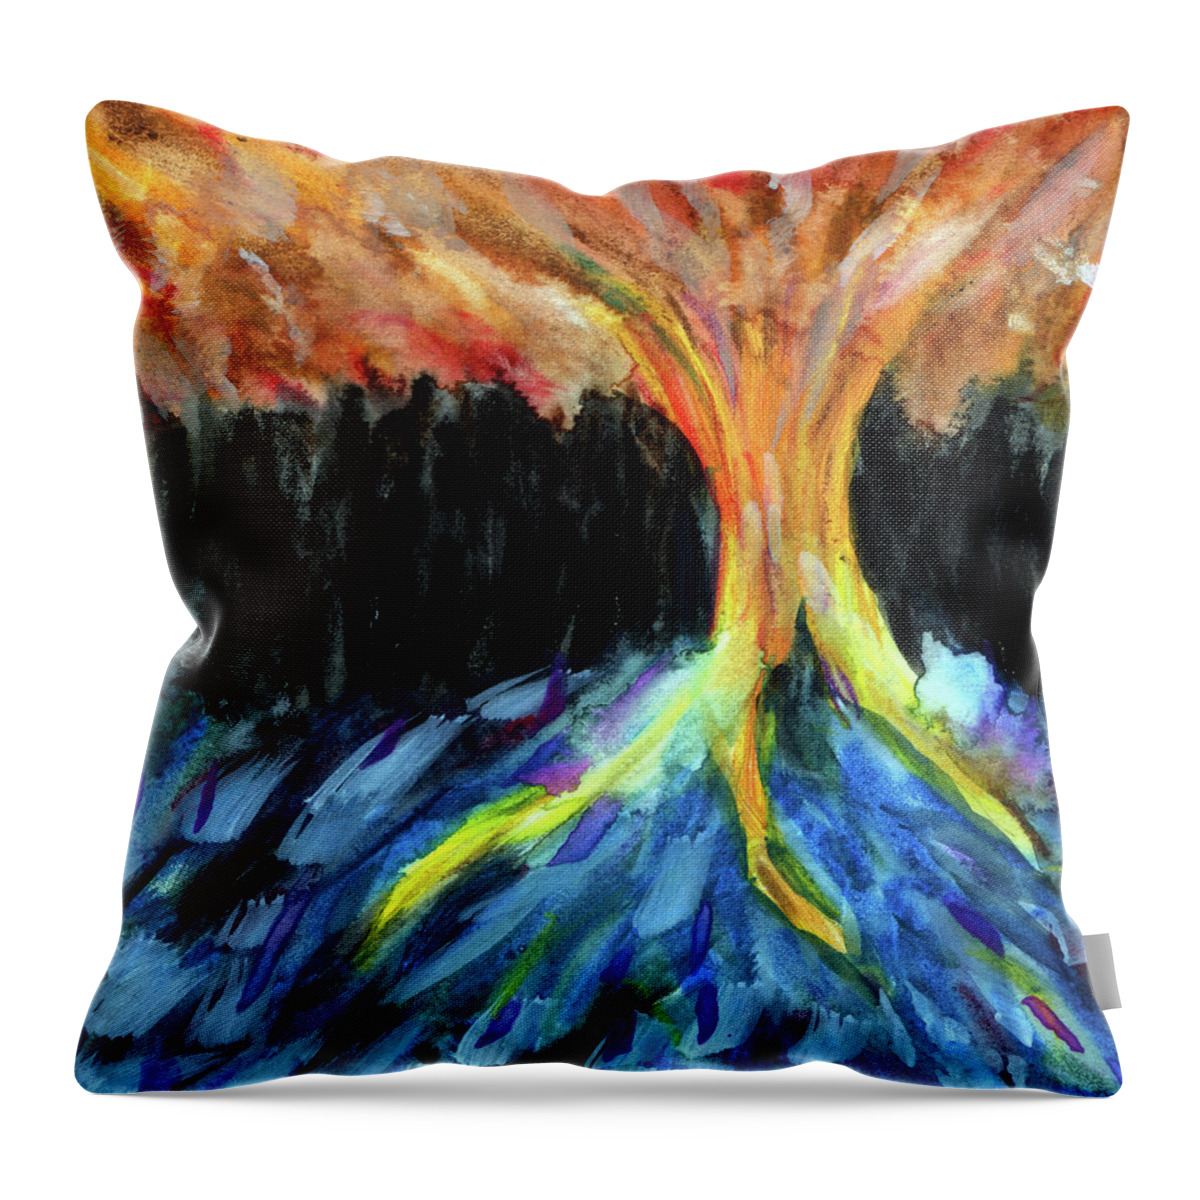 Blue Throw Pillow featuring the painting Blue Abstract Tree by R Kyllo